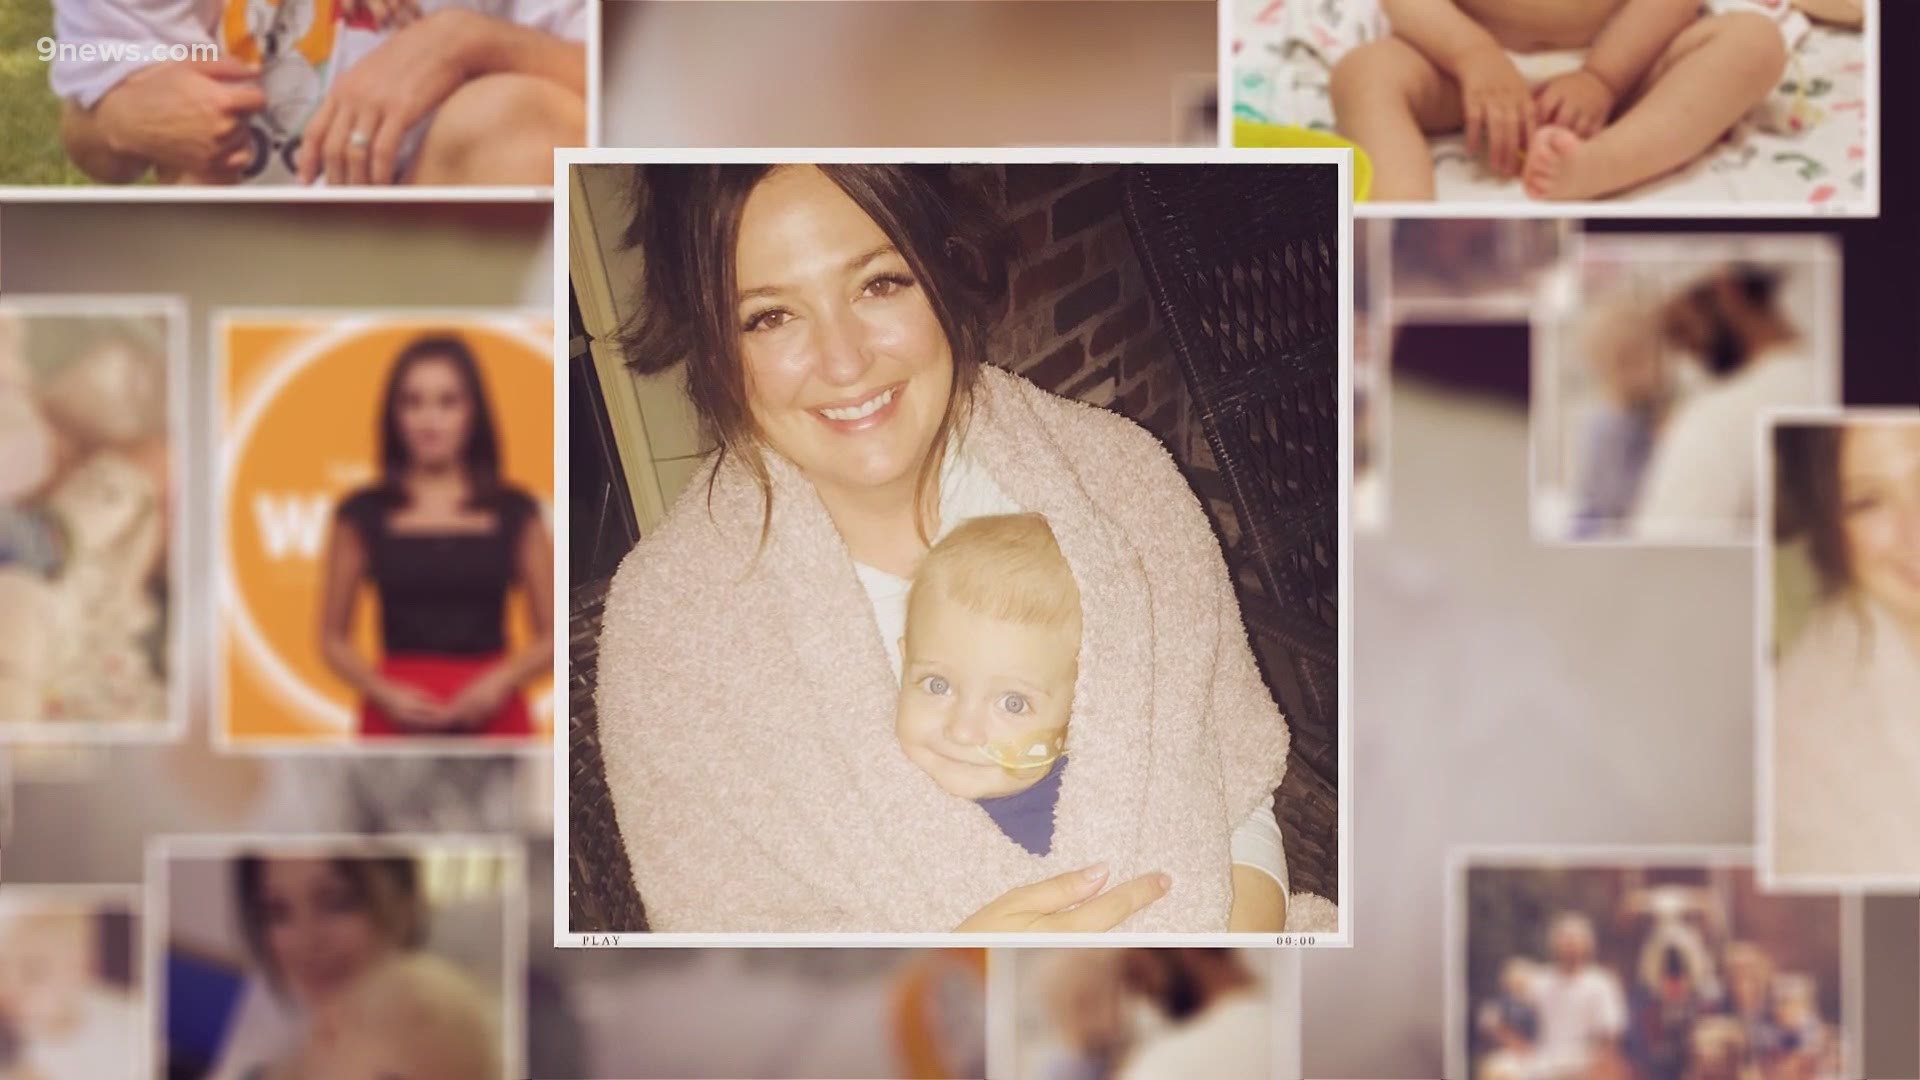 Her son's battle with cancer led a Colorado mom to a fight of her own: She's started her own non-profit to raise money for childhood cancer.